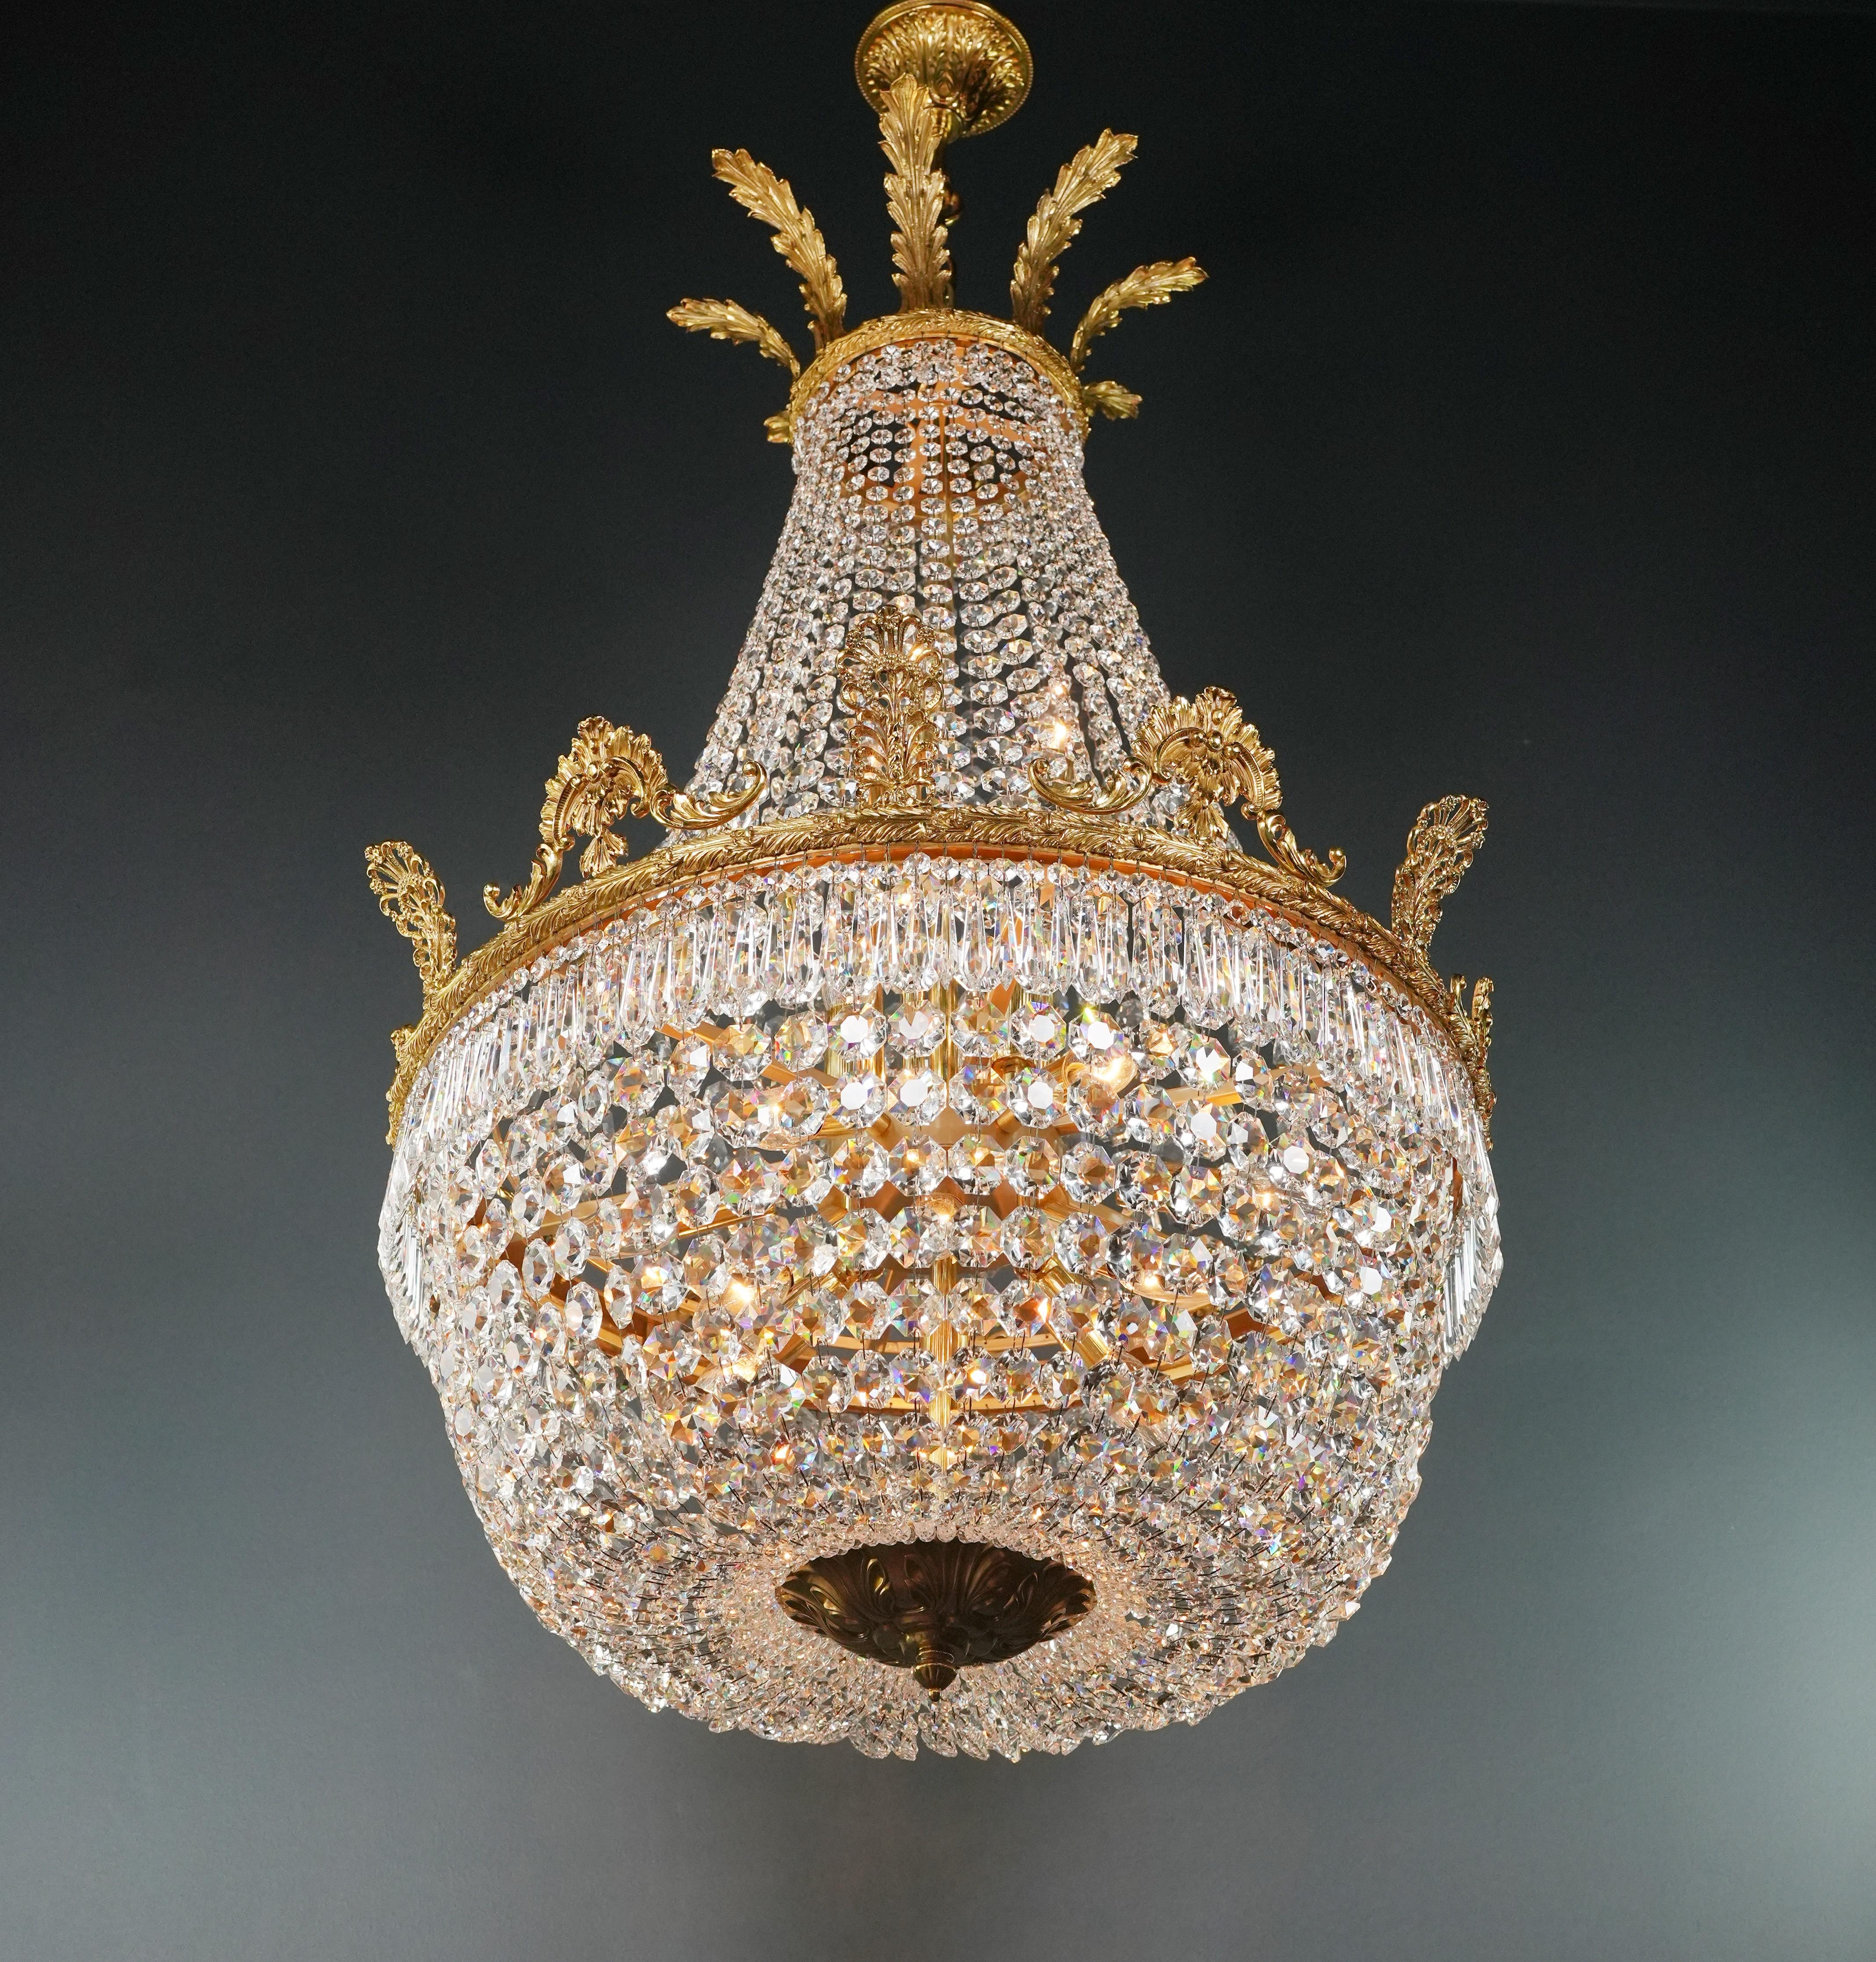 Brass Basket Empire Sac a Pearl Chandelier Crystal Lustre Lamp Antique Gold For Sale 1